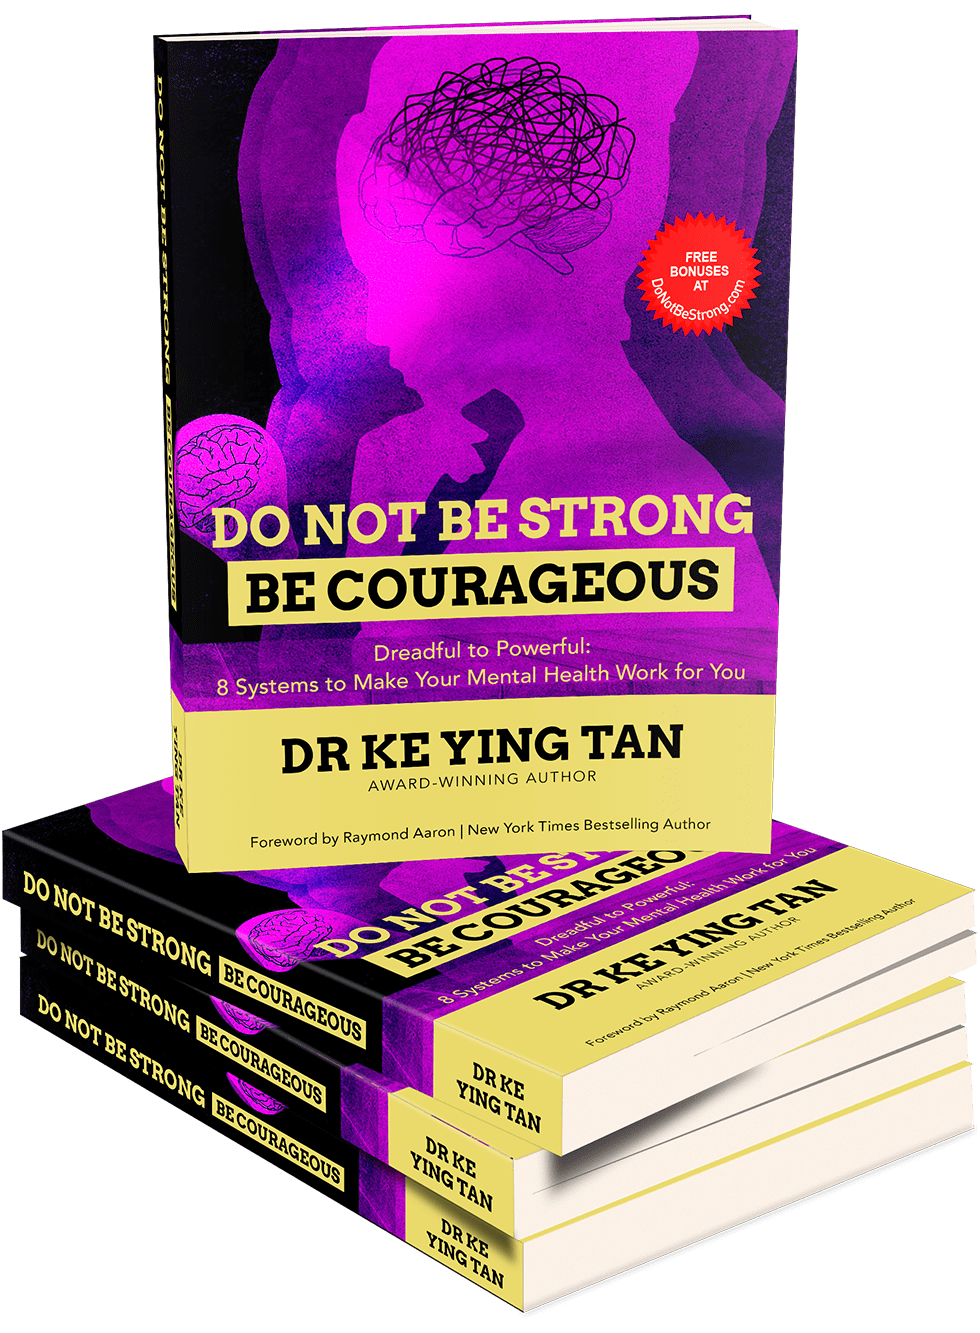 Do Not Be Stronge, Be Corageous - Book Cover